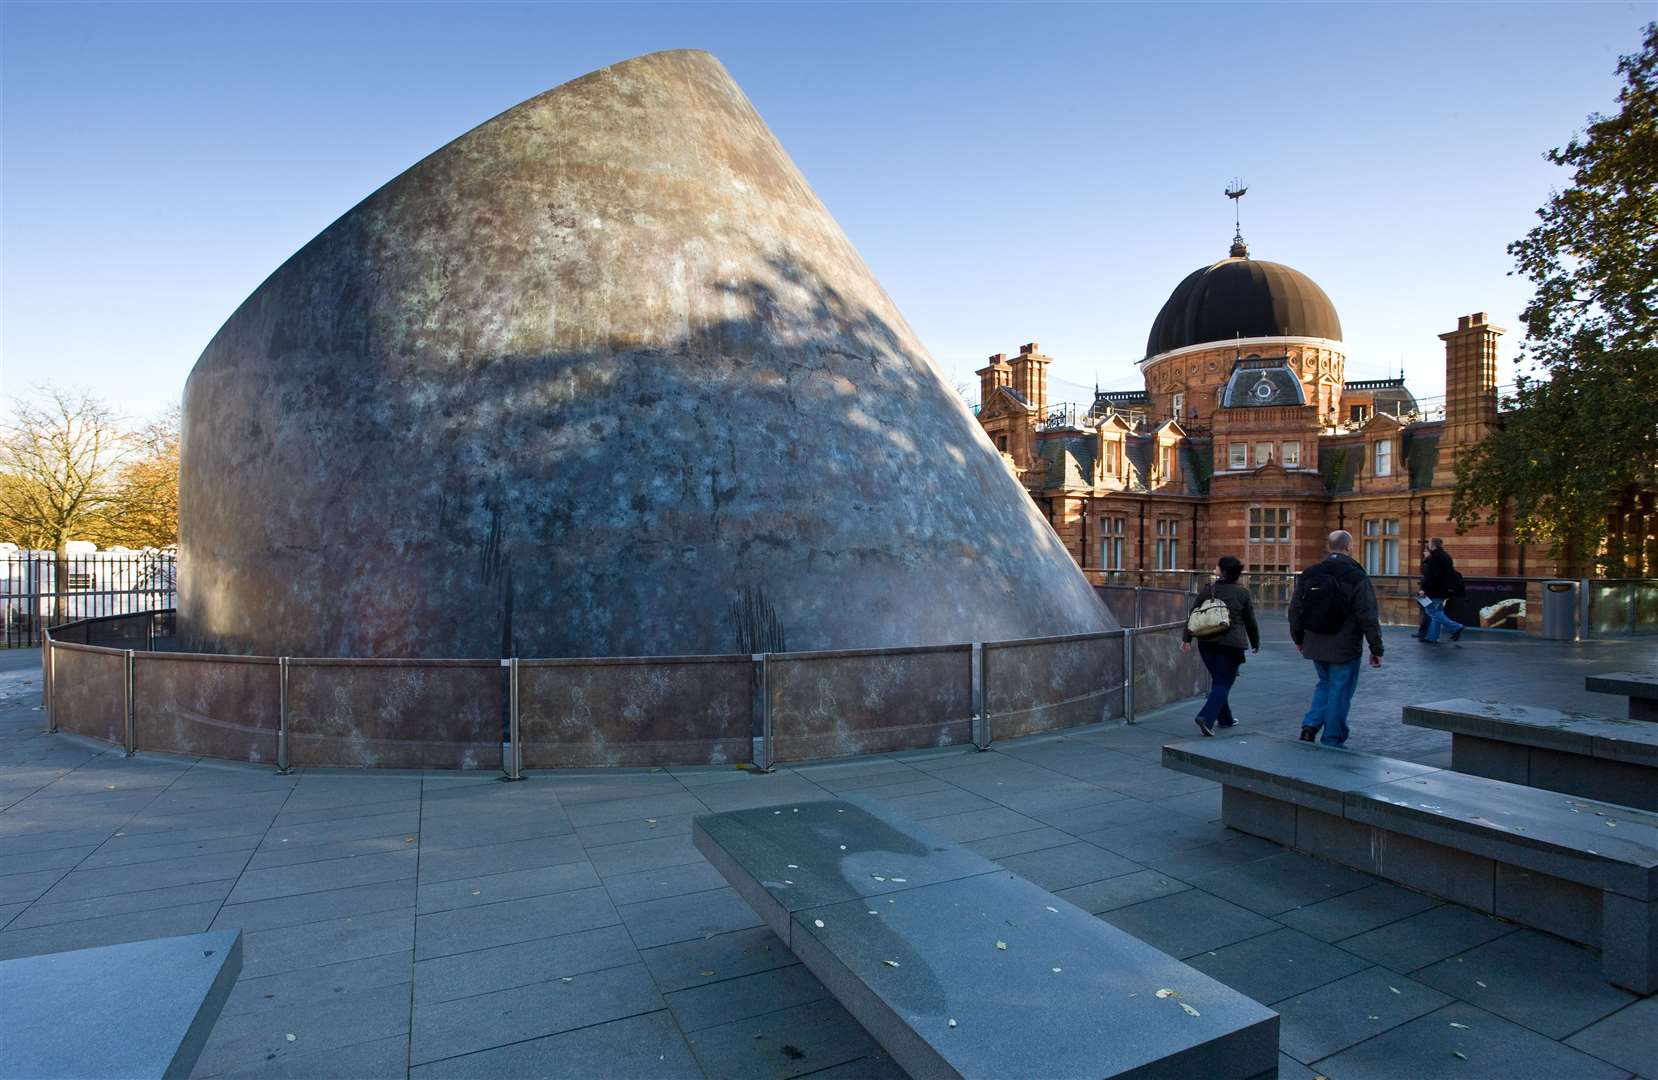 The Royal Observatory in Greenwich shares advice on its website for budding stargazers